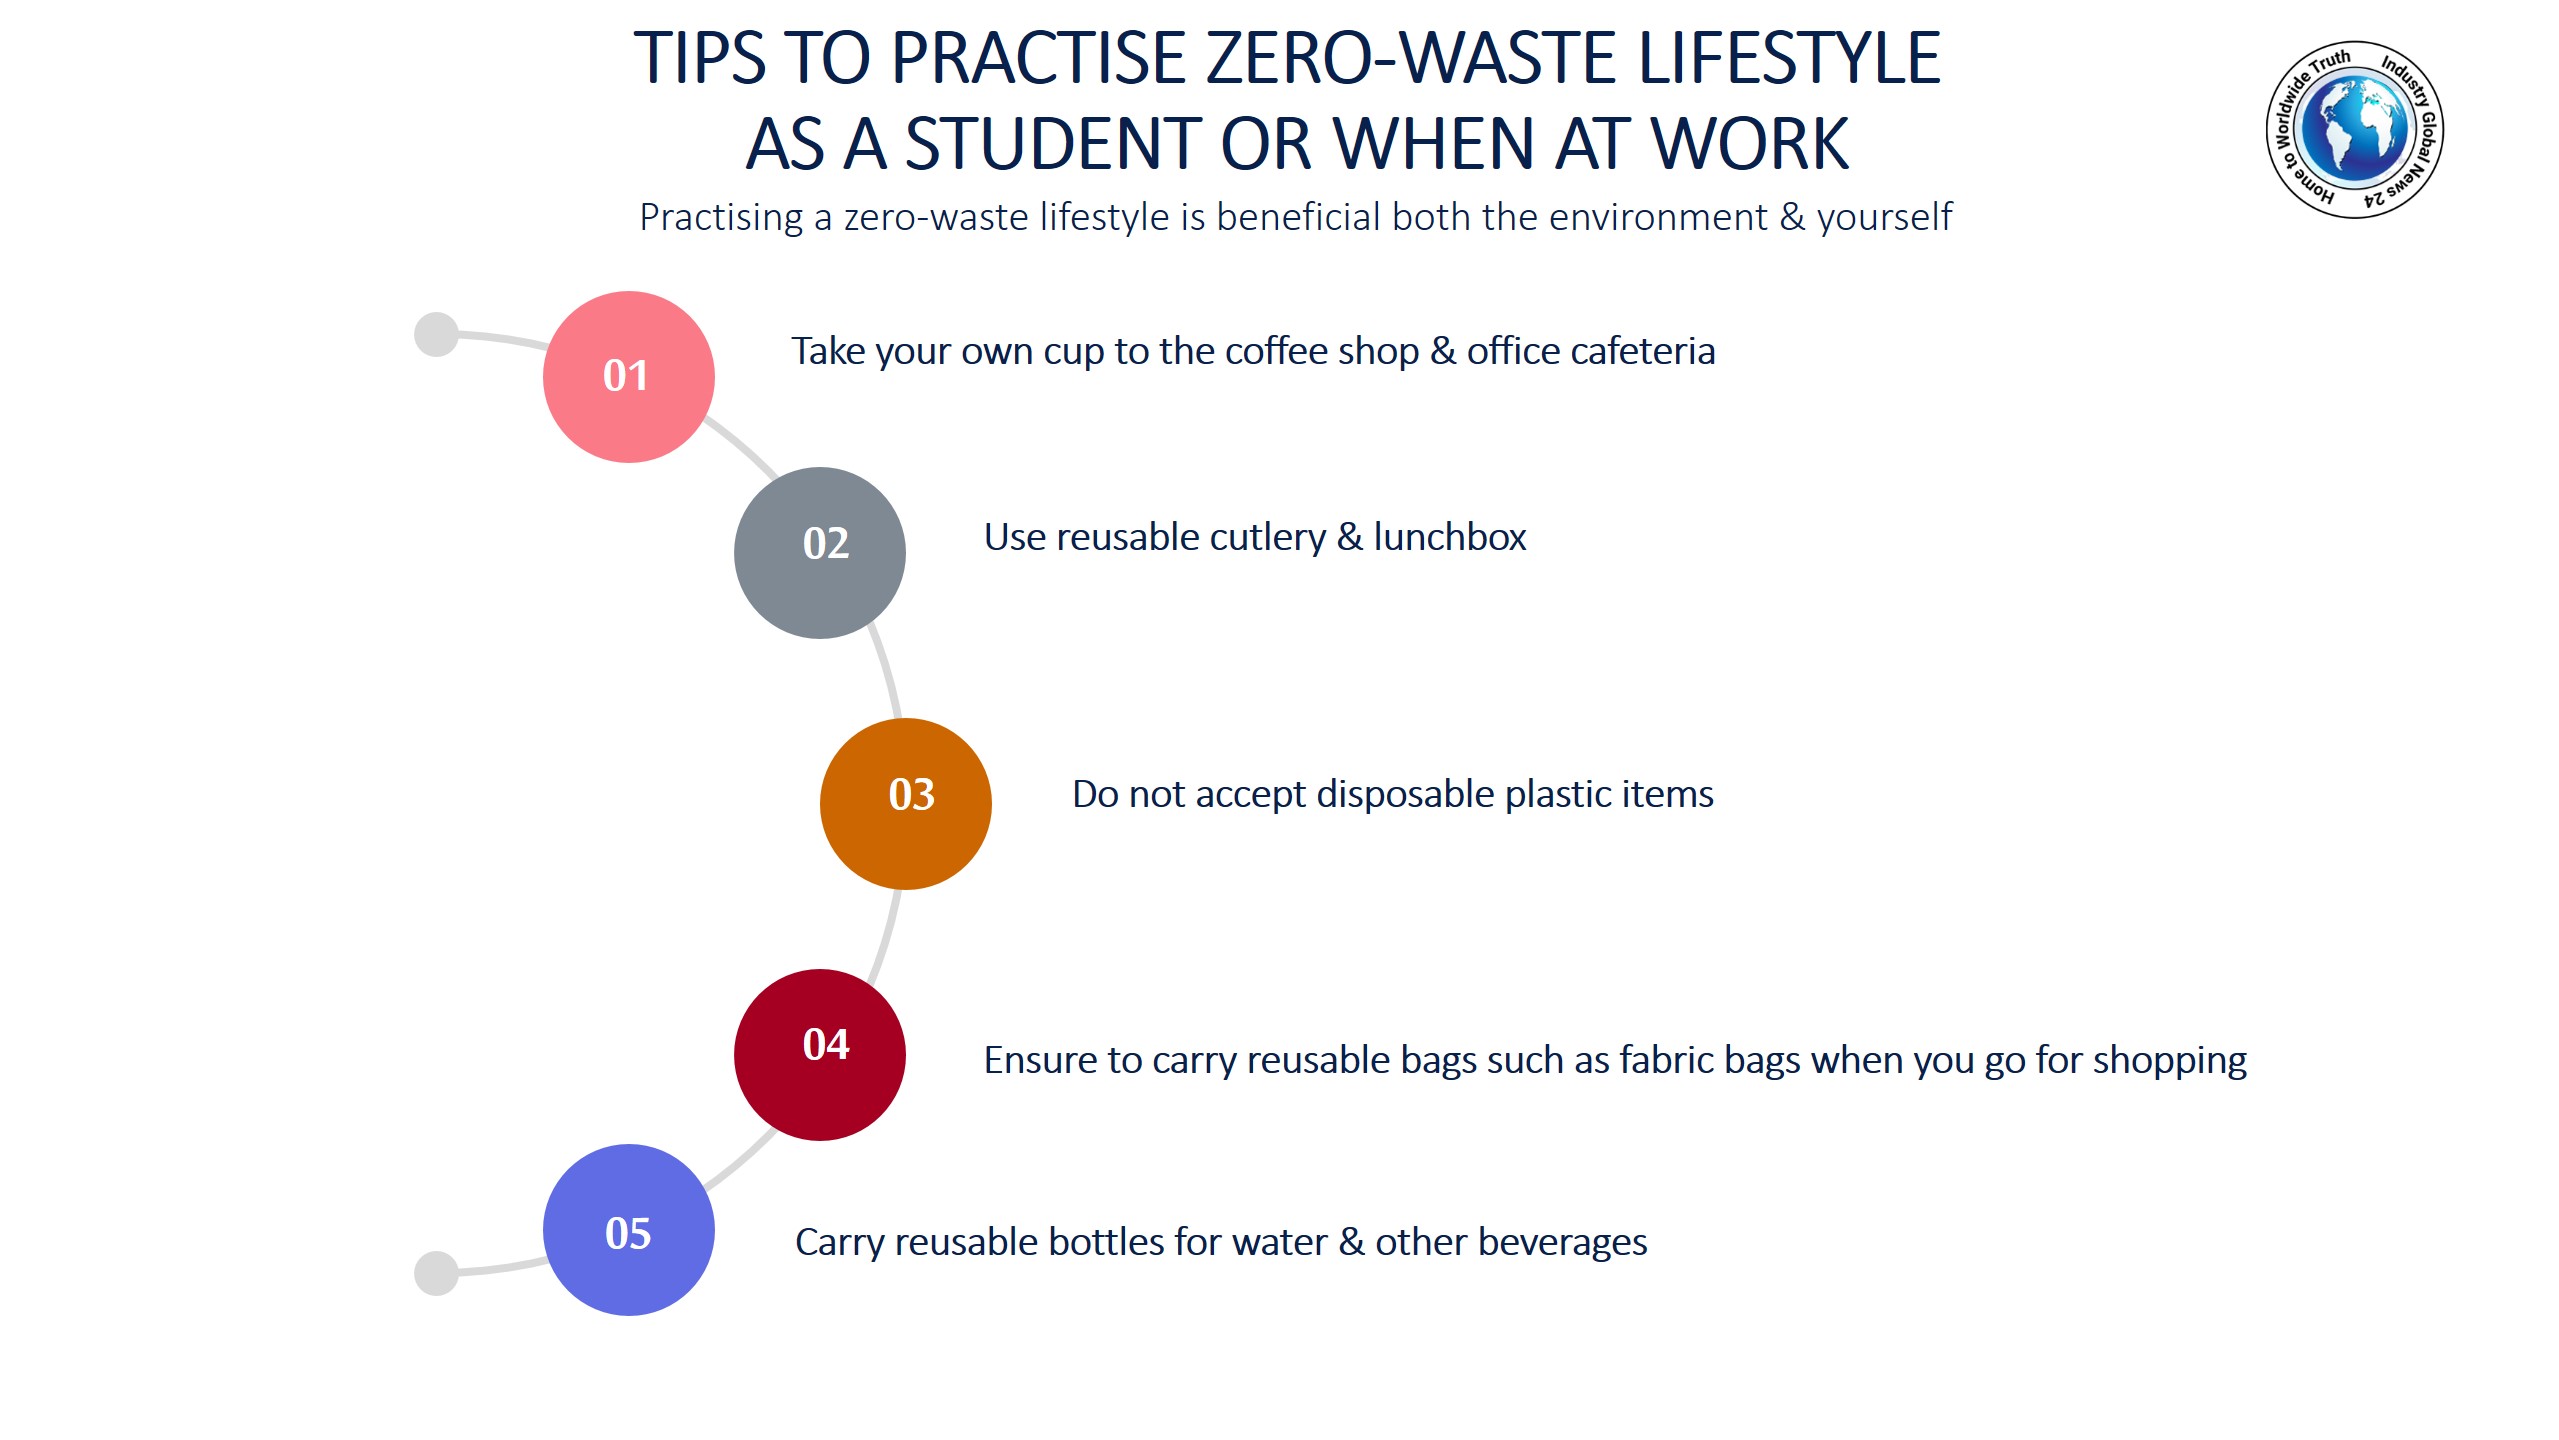 Tips to practise zero-waste lifestyle as a student or when at work